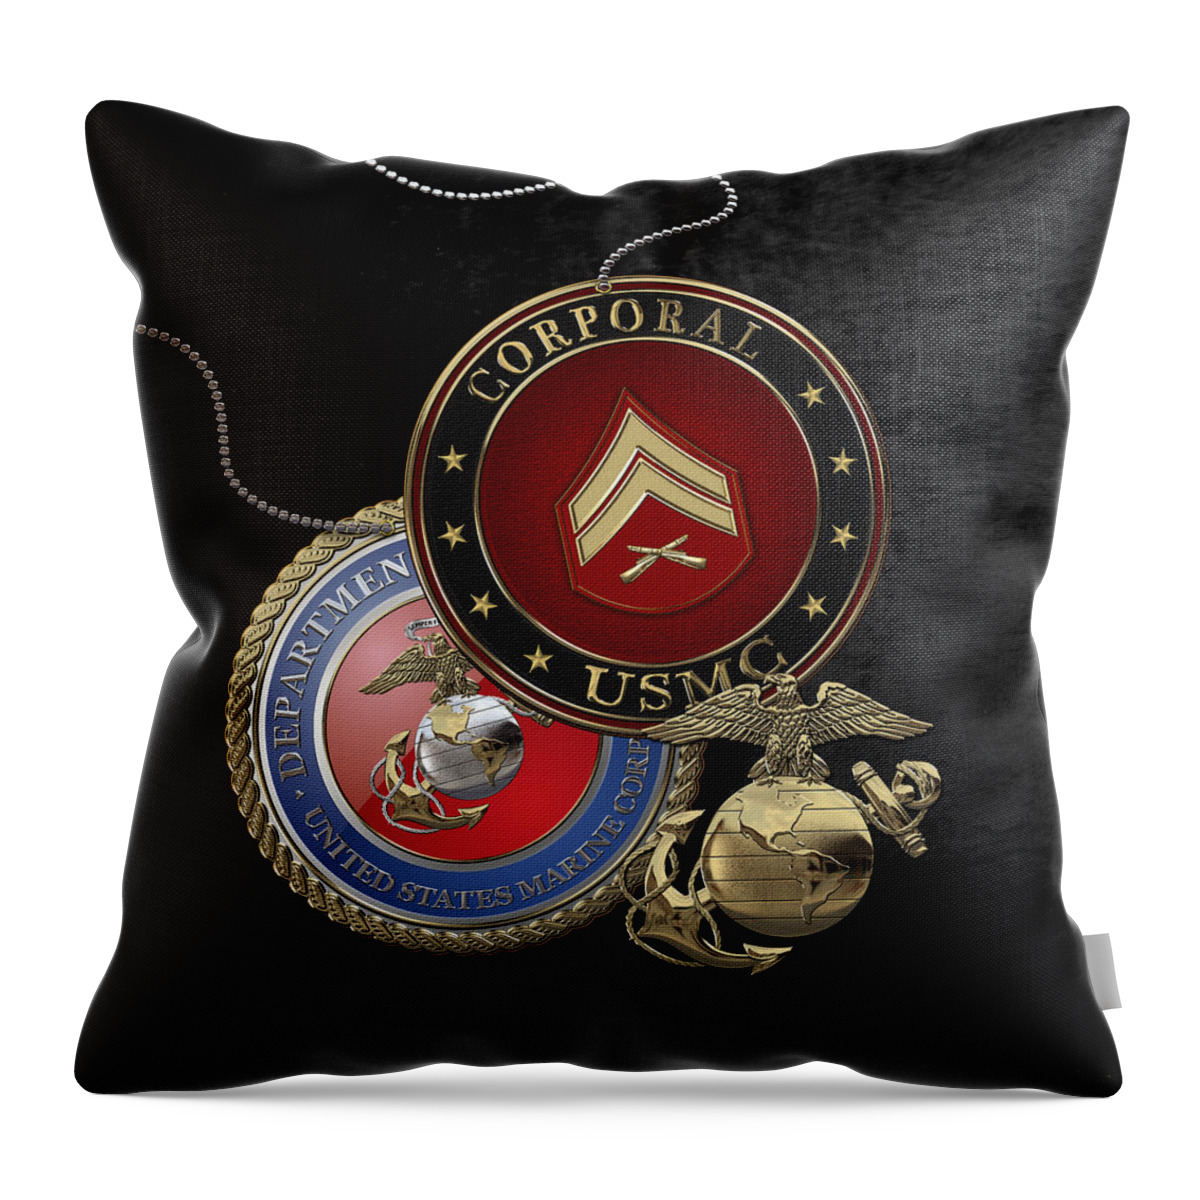 �military Insignia 3d� By Serge Averbukh Throw Pillow featuring the digital art U. S. Marines Corporal Rank Insignia over Black Velvet by Serge Averbukh